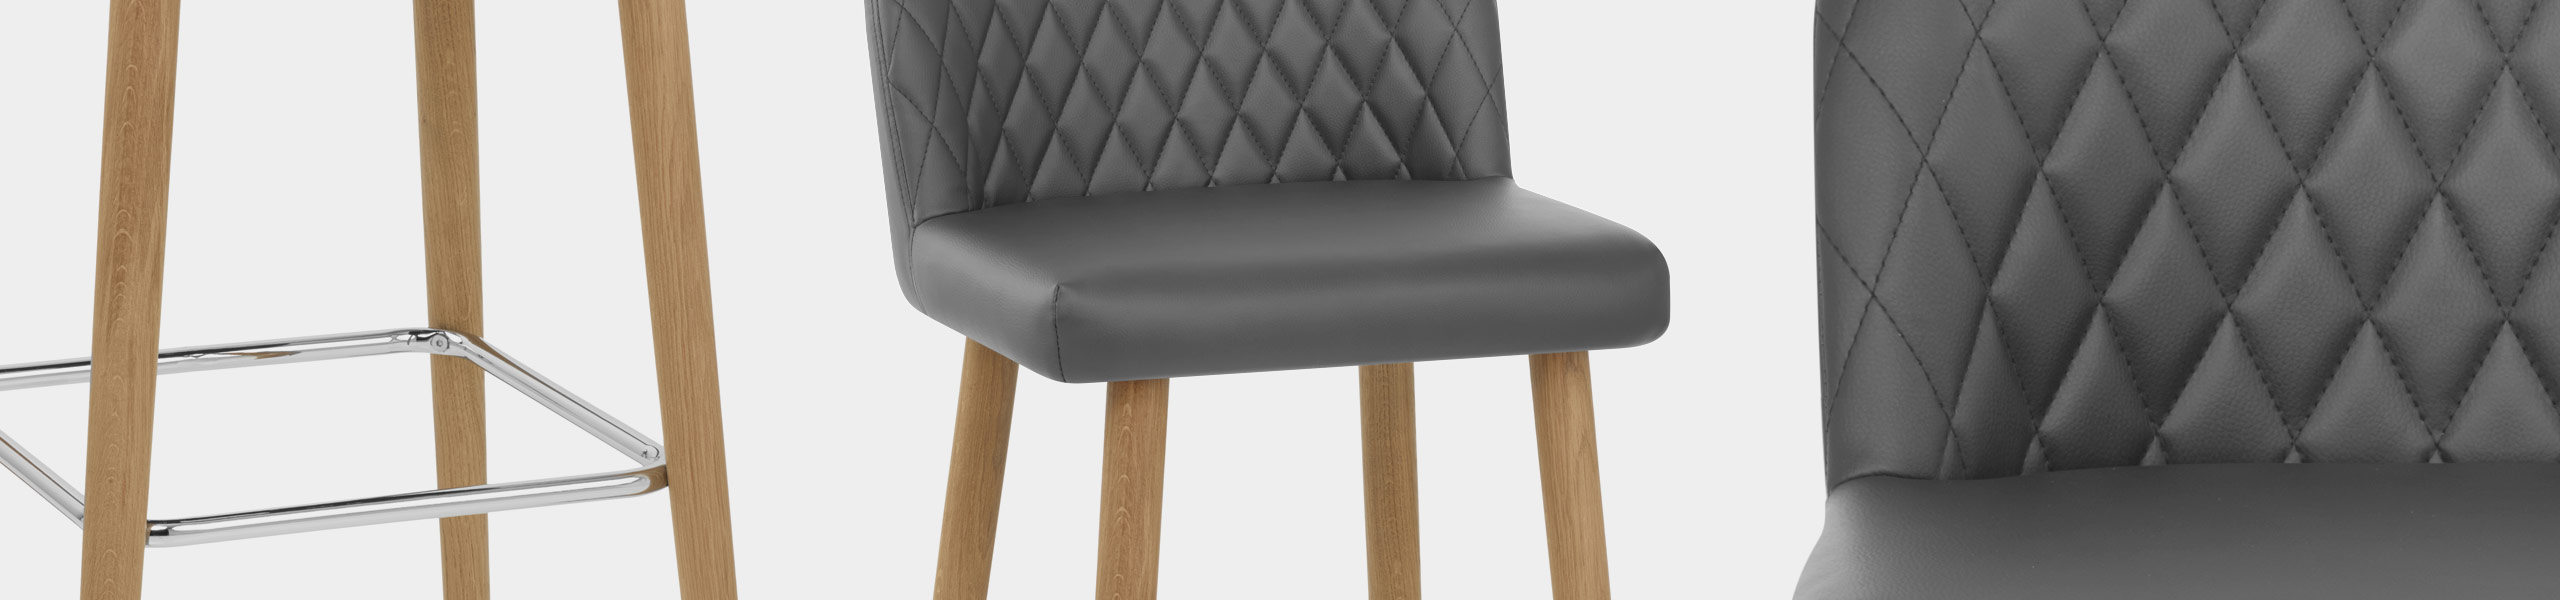 Pacific Wooden Stool Grey Video Banner